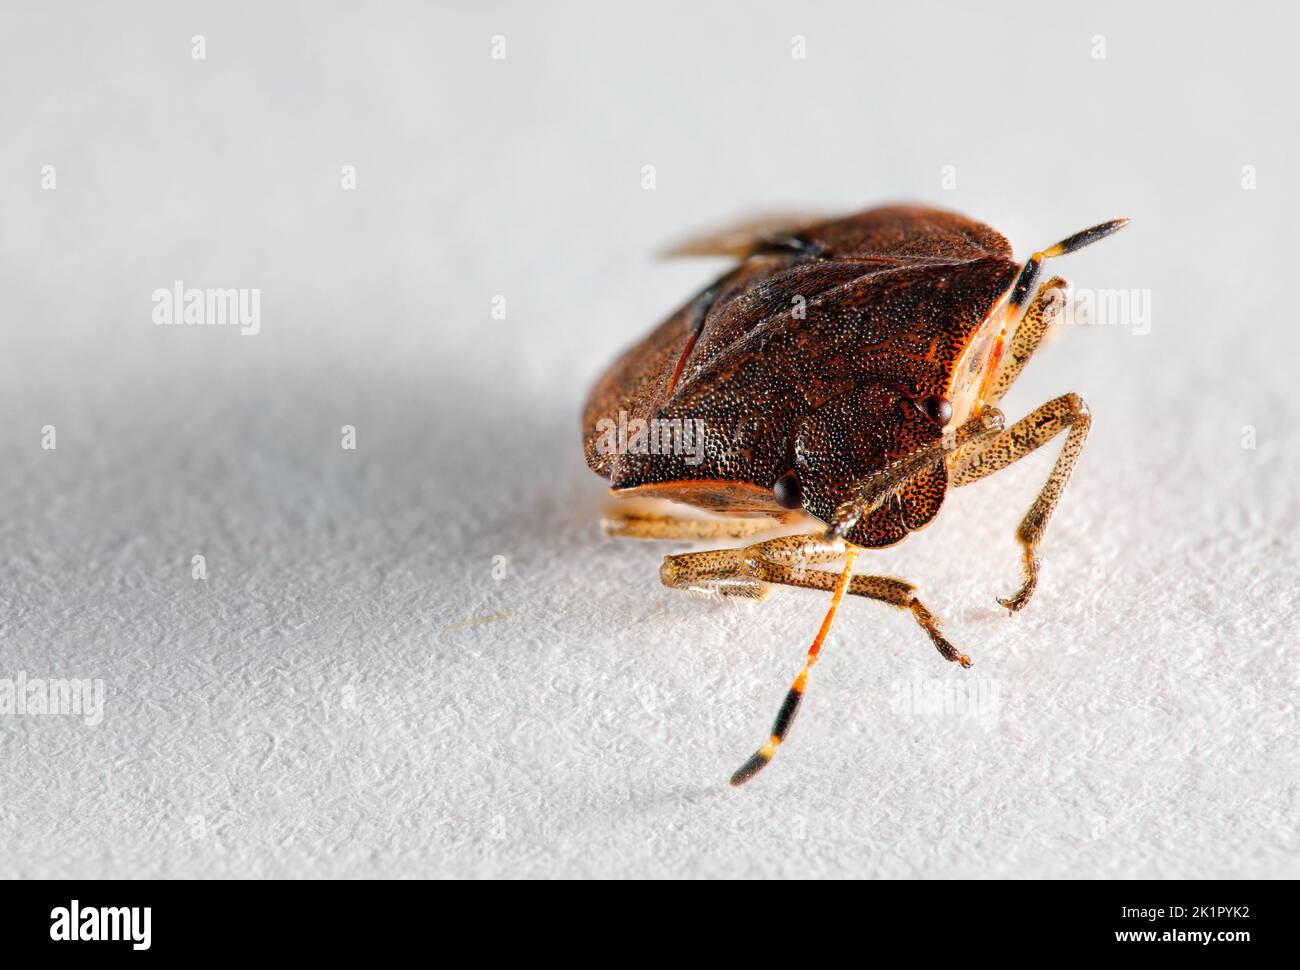 Closeup of a beetle with large brown eyes and a shiny shell on a white background with a gray shadow. Stock Photo